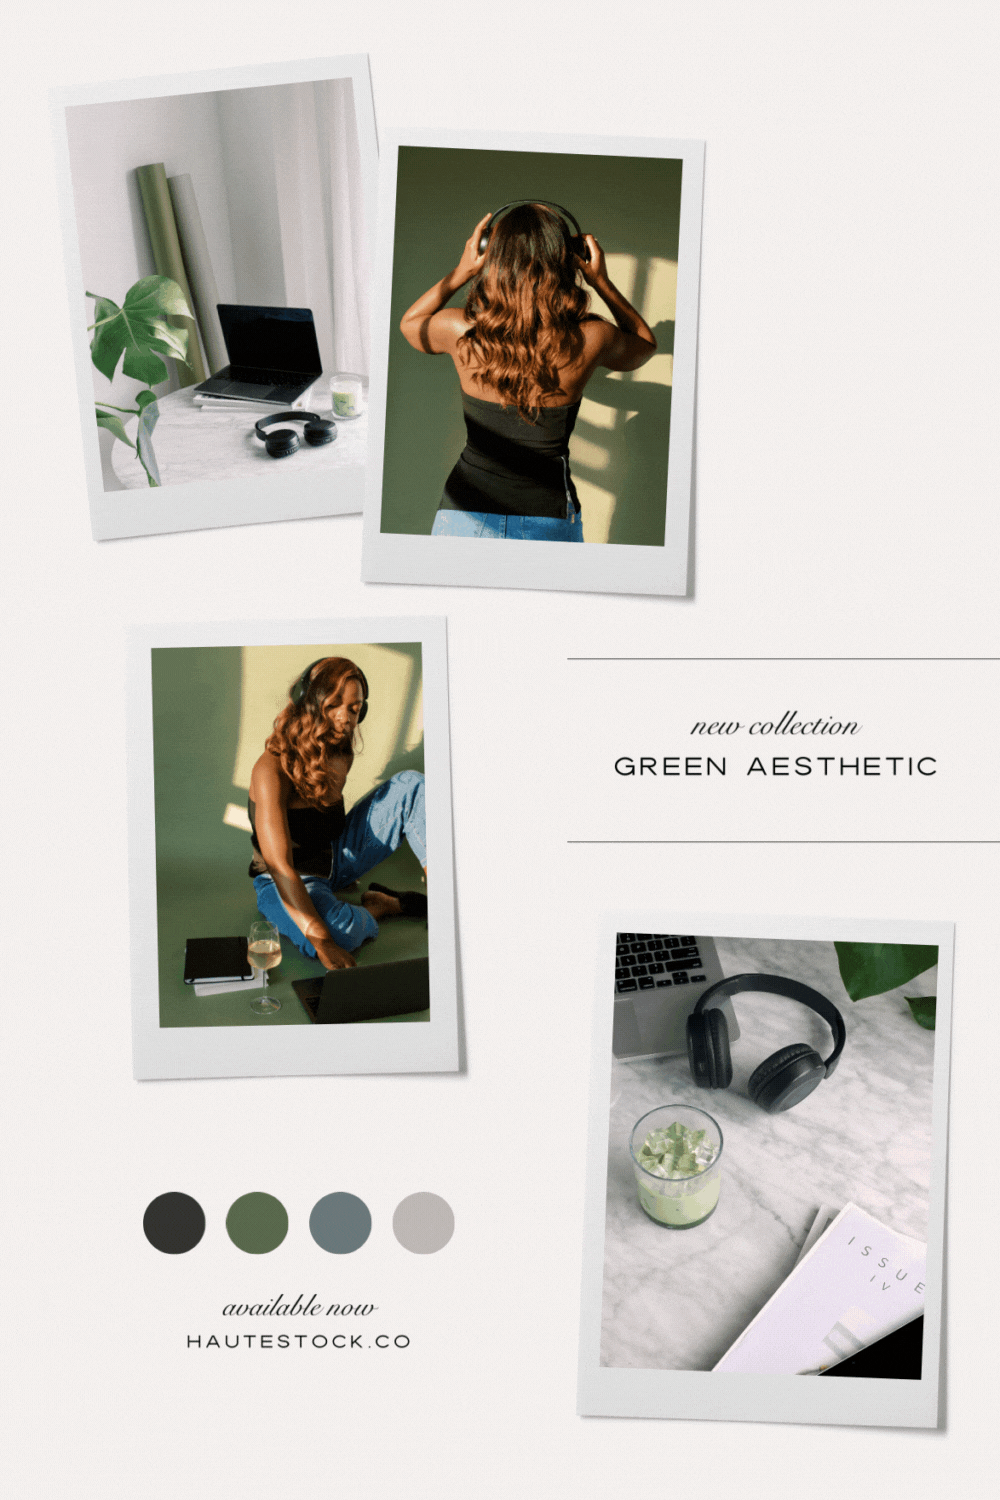 Mood board for Green Aesthetic, Haute Stock' new collection, featuring moody, green stock photos and videos of workspace and podcast setting. 